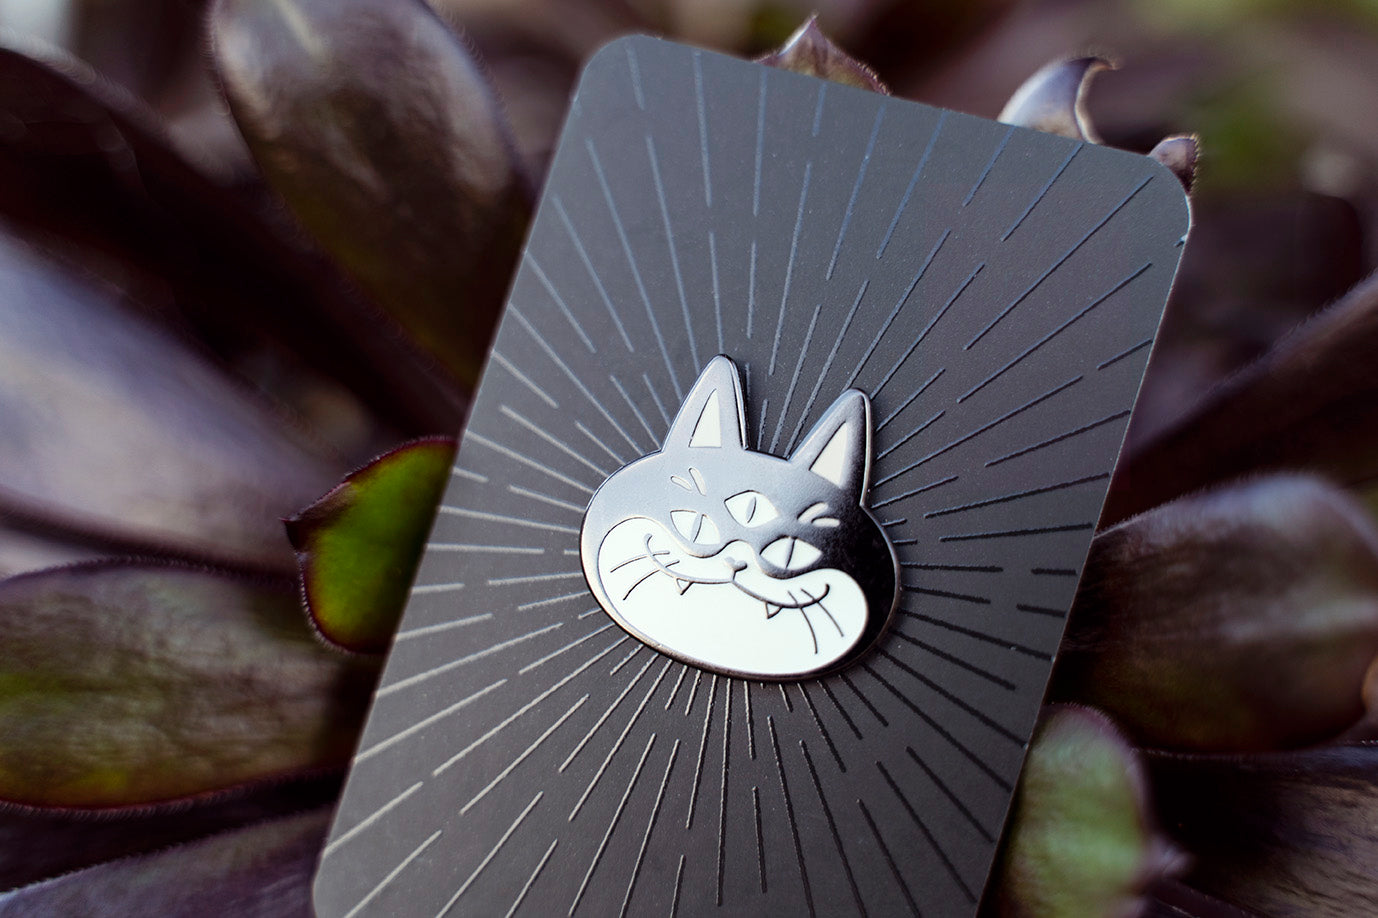 'Three-Eyed Cat' Glow-in-the-Dark Pin by Stacey Robson